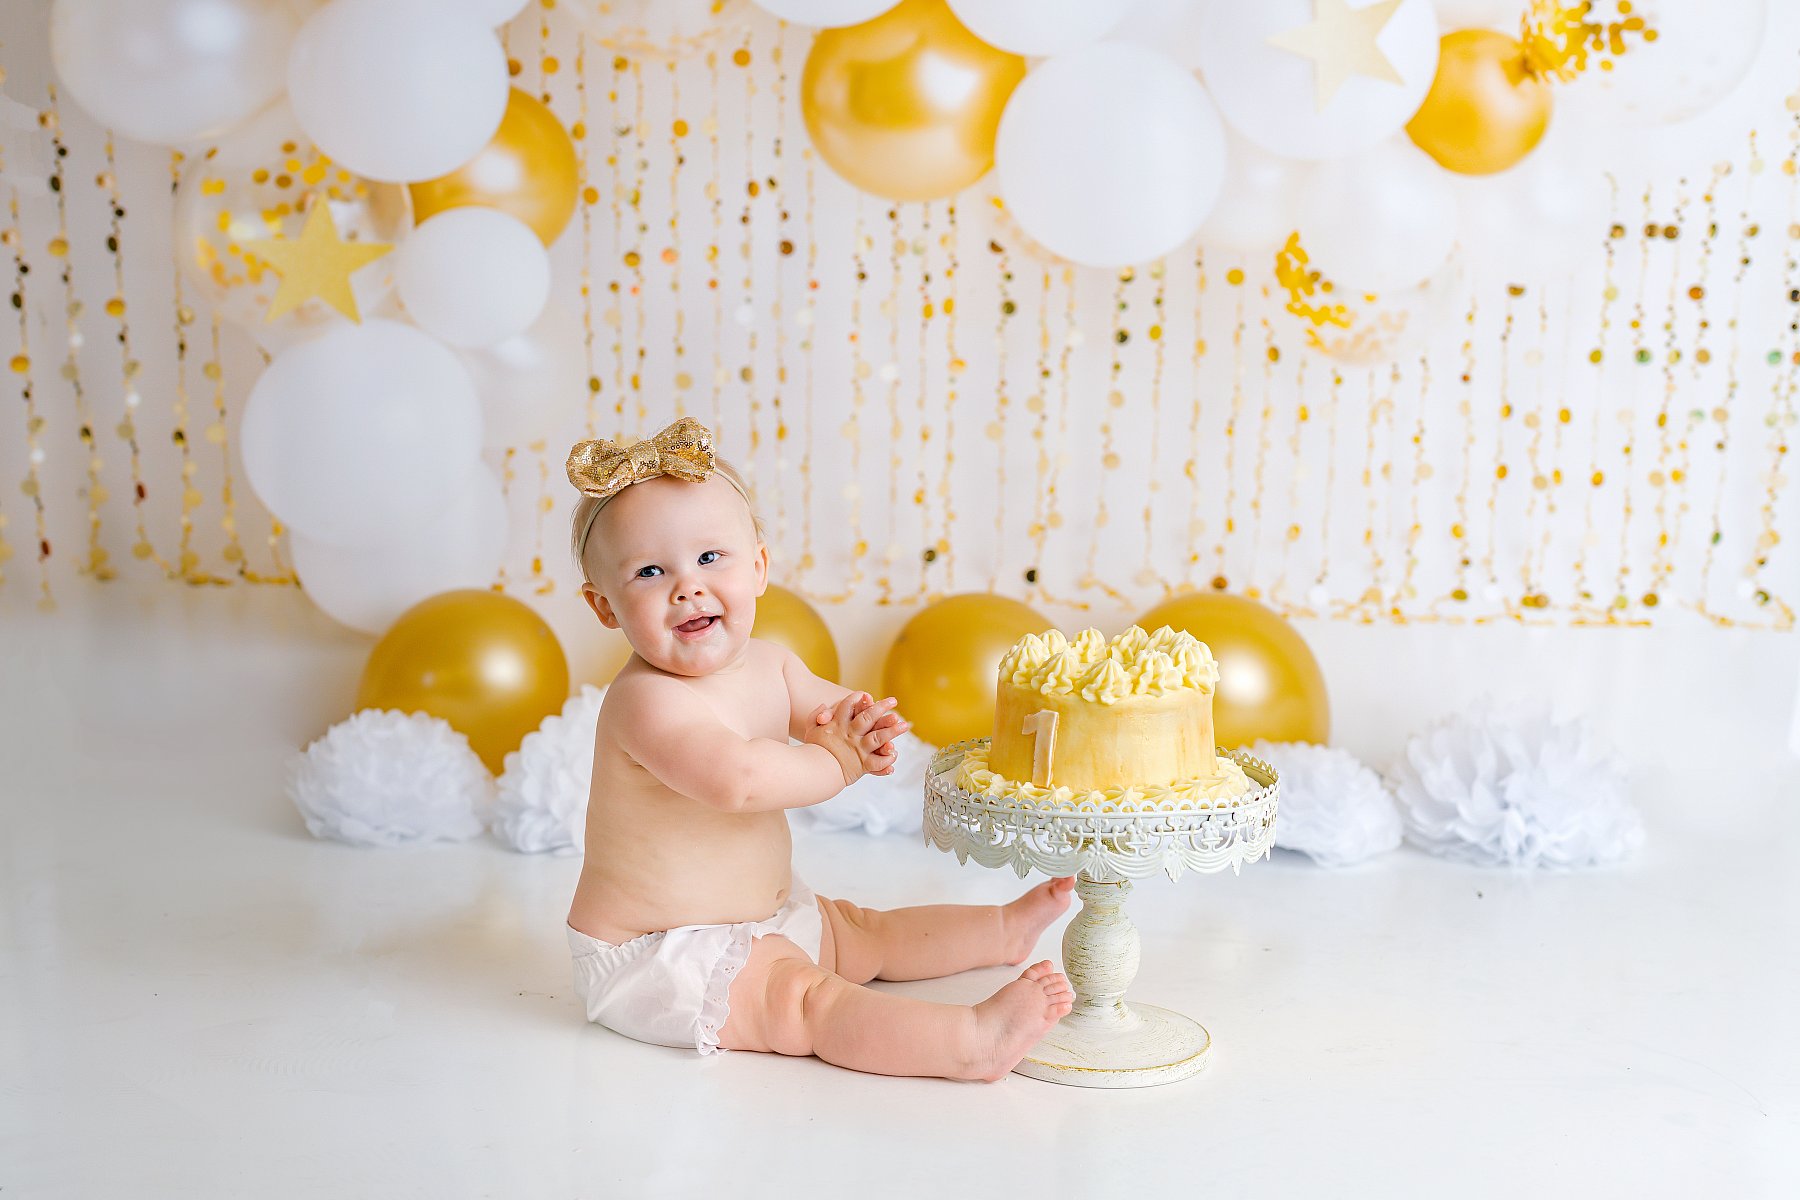 First Birthday Baby Photography Near Me - Elles Photography Studio